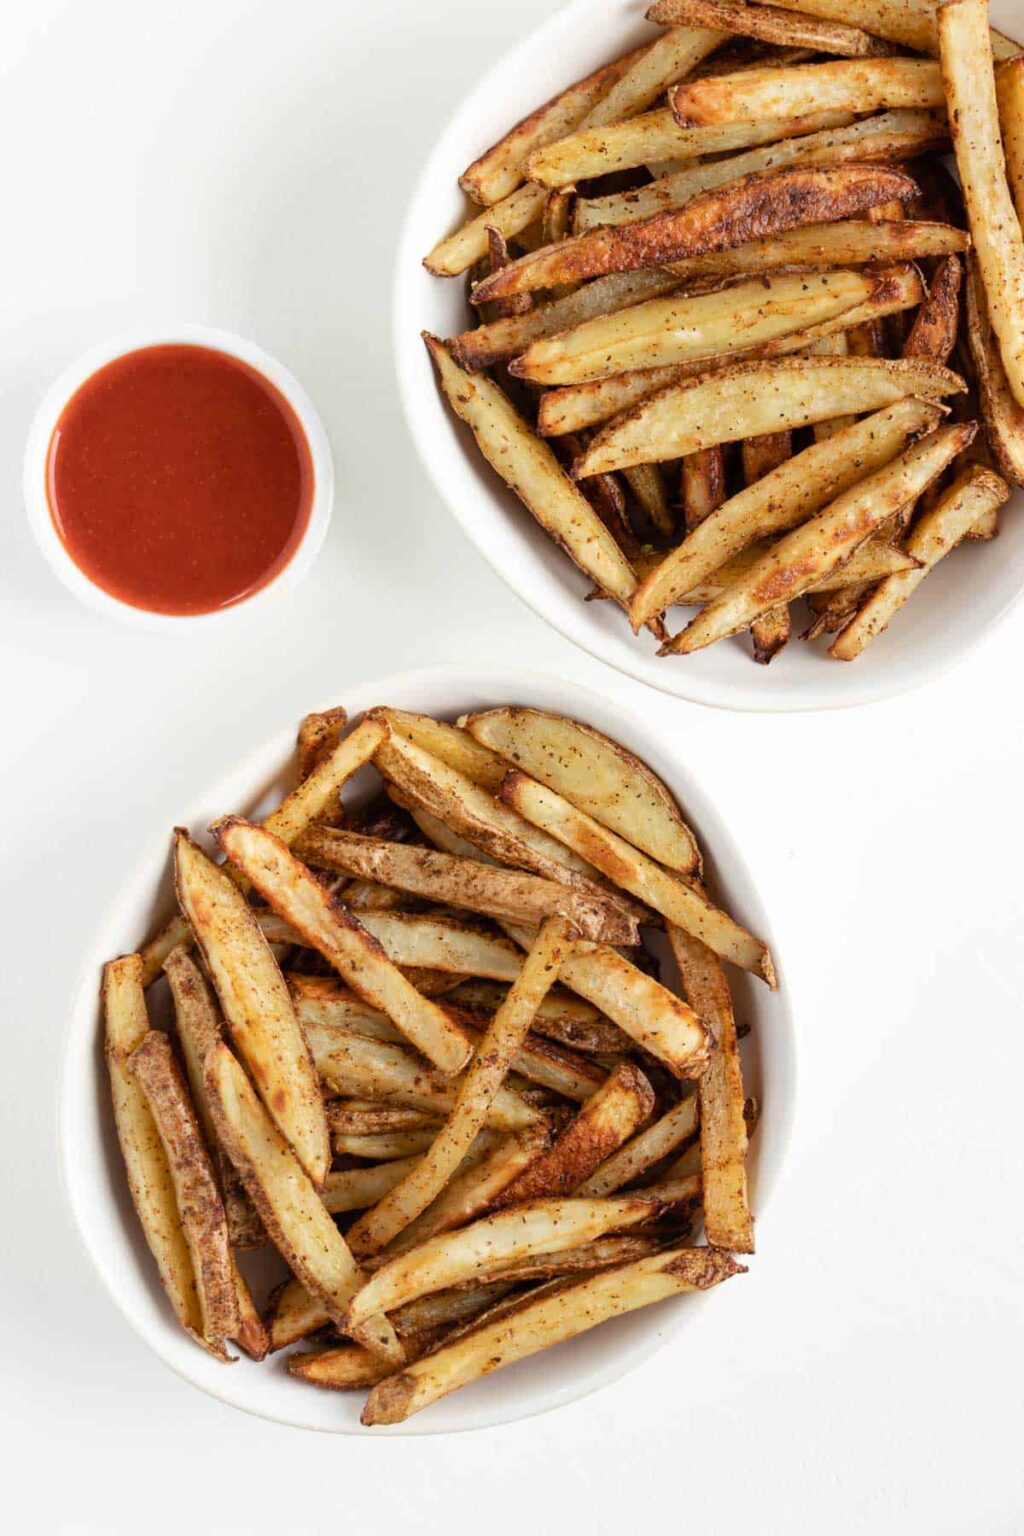 Crispy Baked French Fries - Purely Kaylie